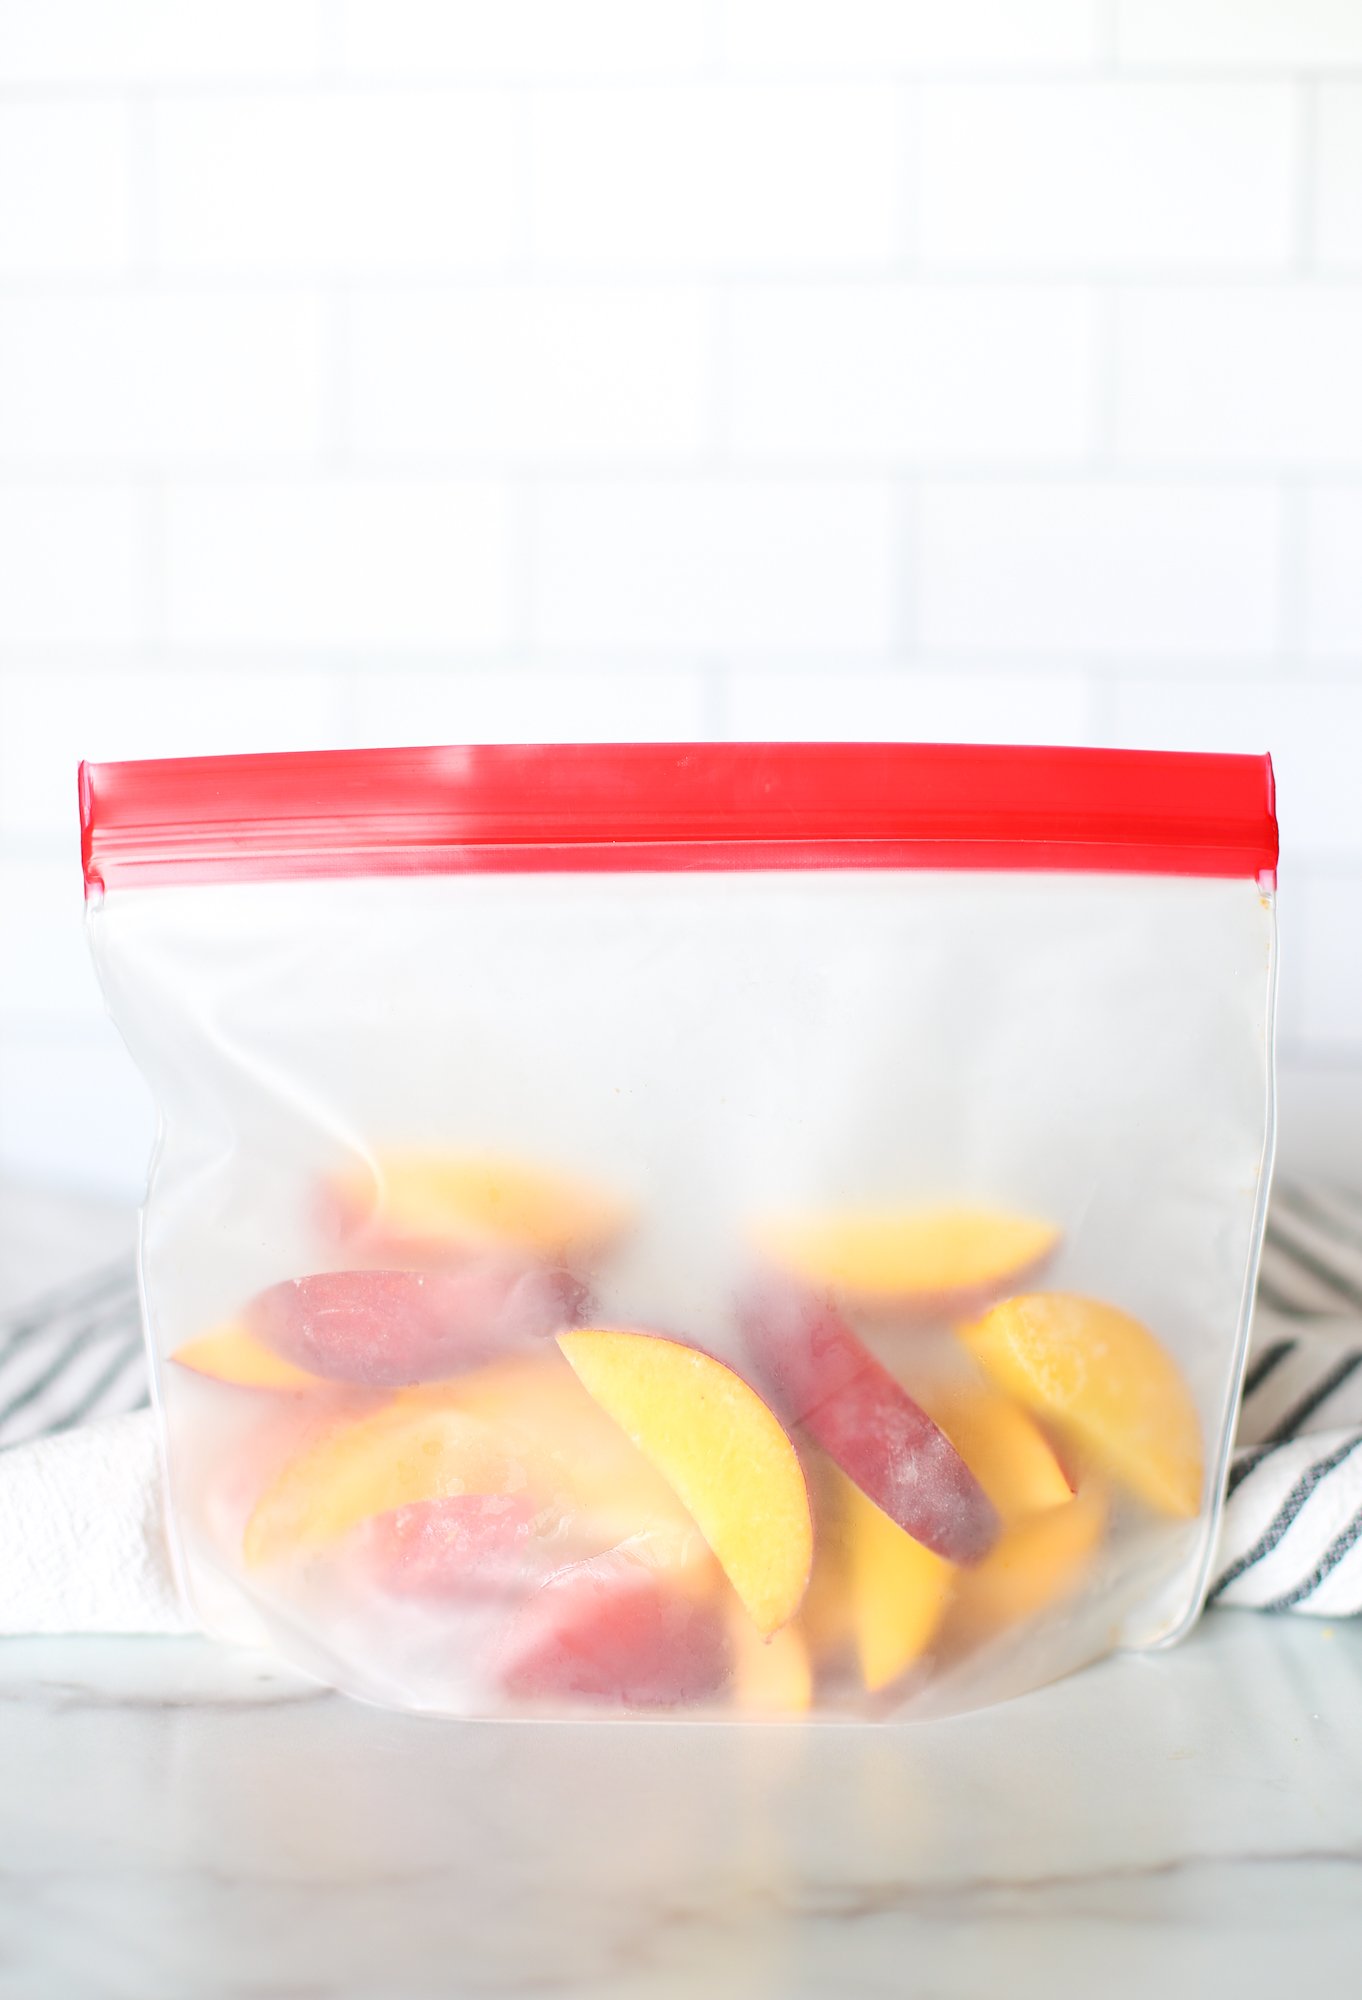 Frozen peaches in a reusable freezer bag on the counter.